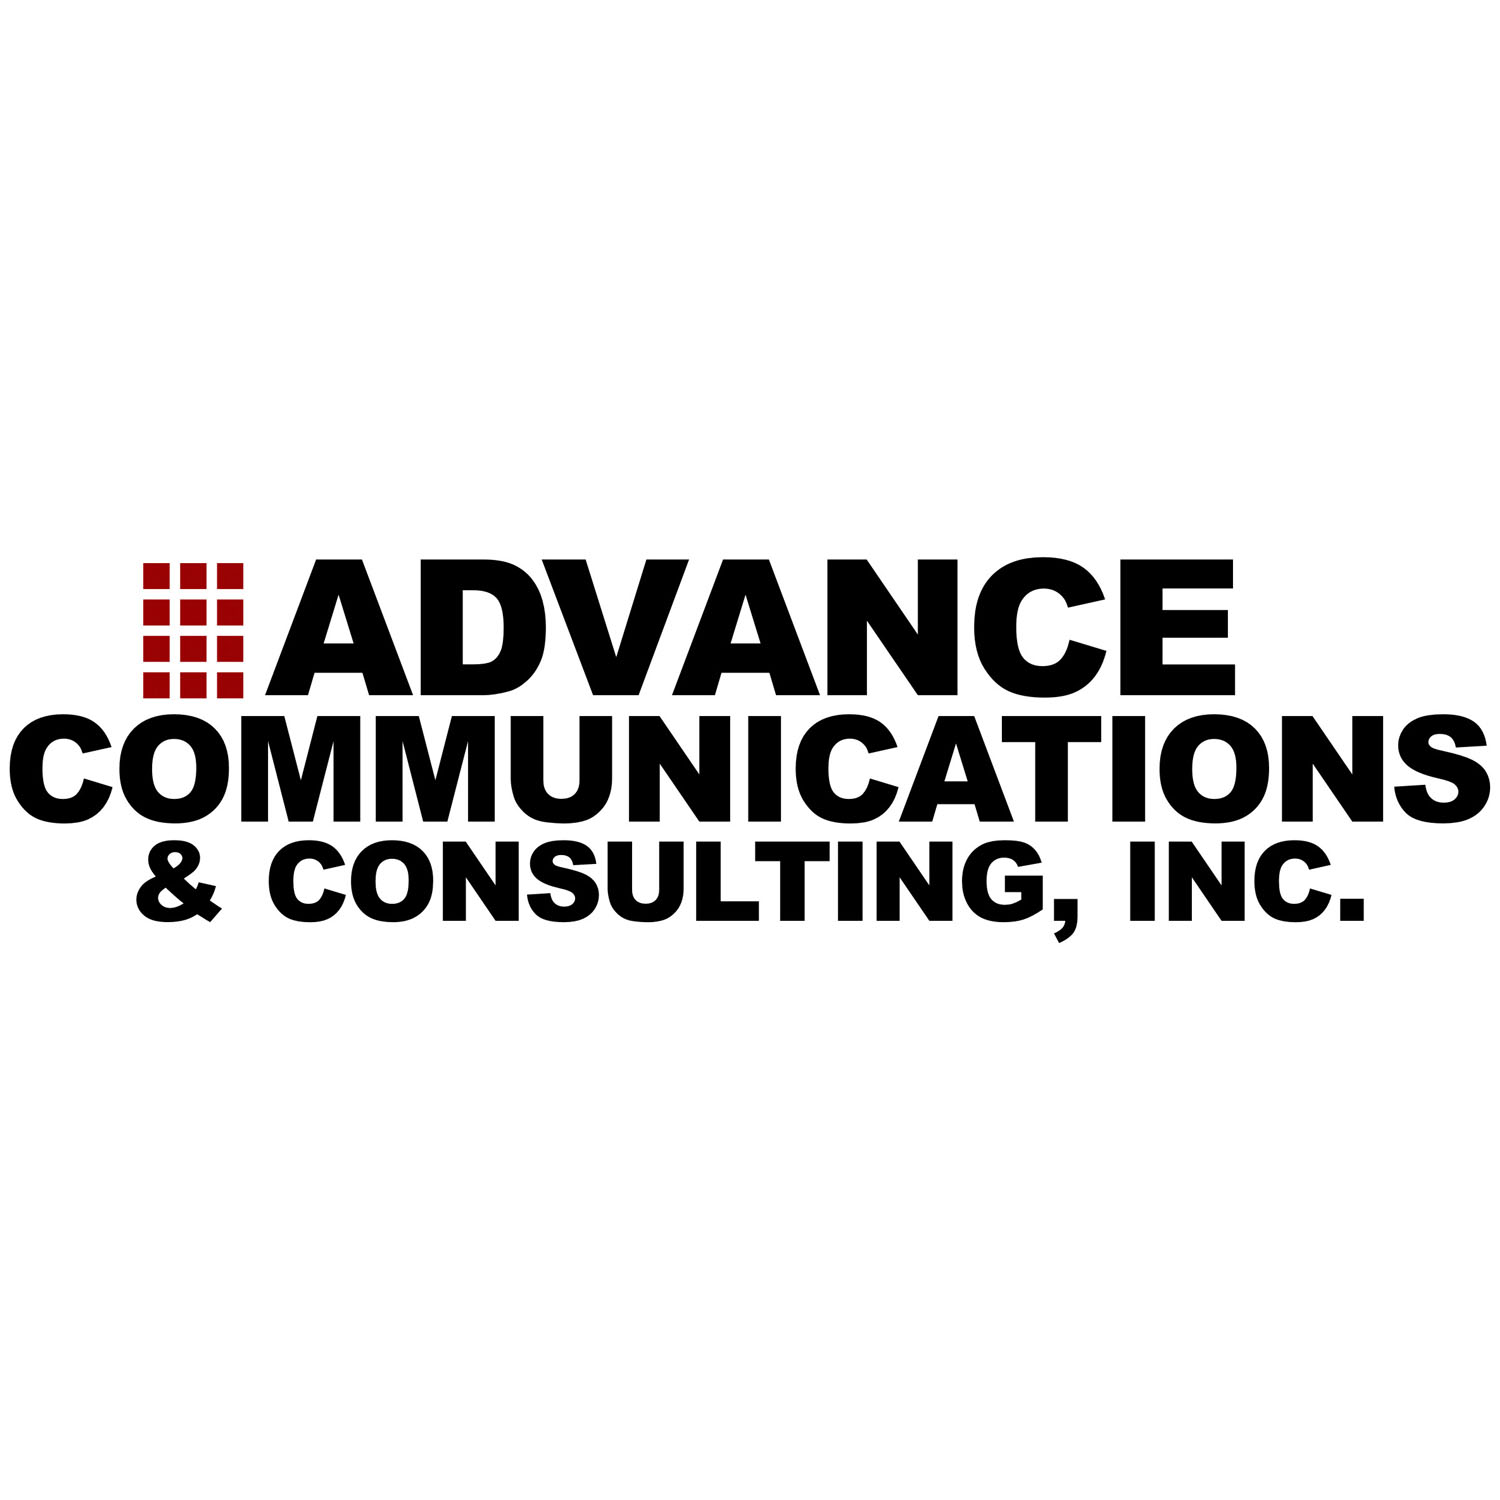 Advance Communications & Consulting, Inc